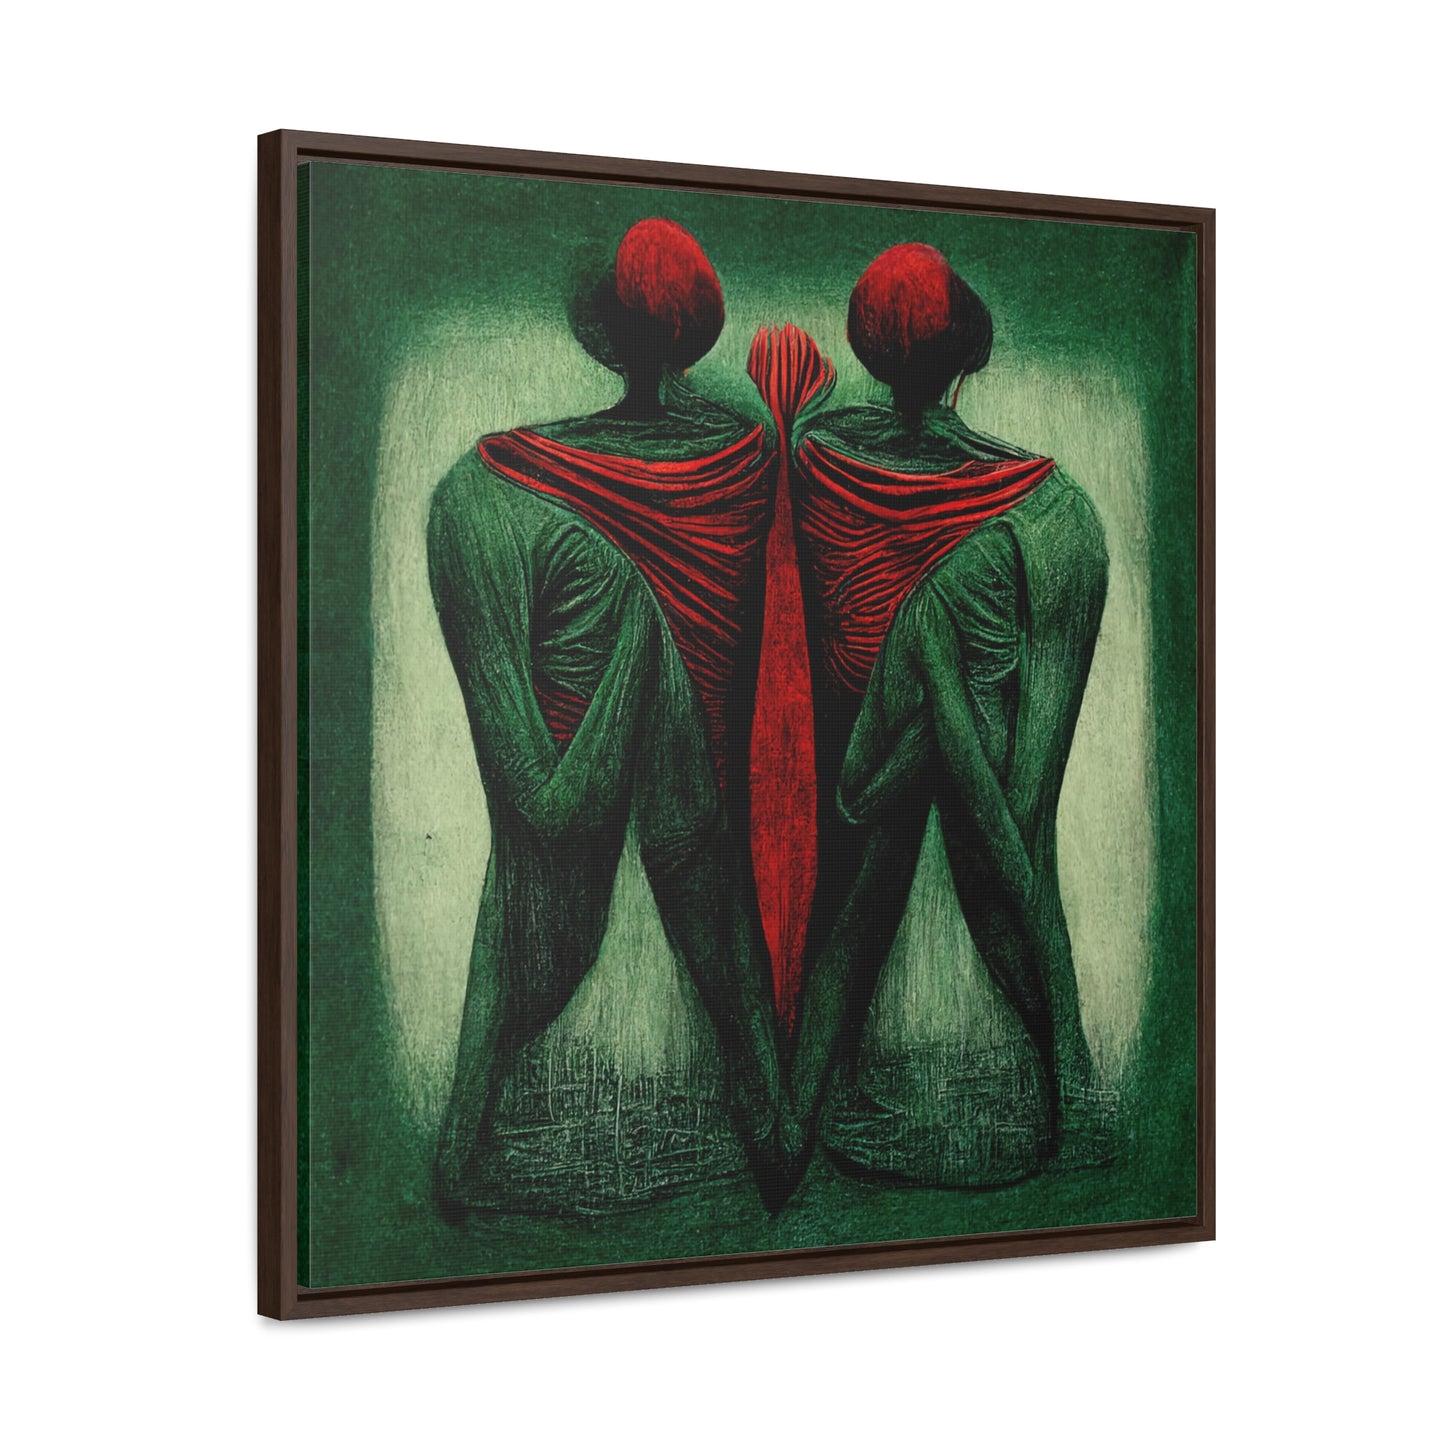 Loneliness Green Red 3, Valentinii, Gallery Canvas Wraps, Square Frame